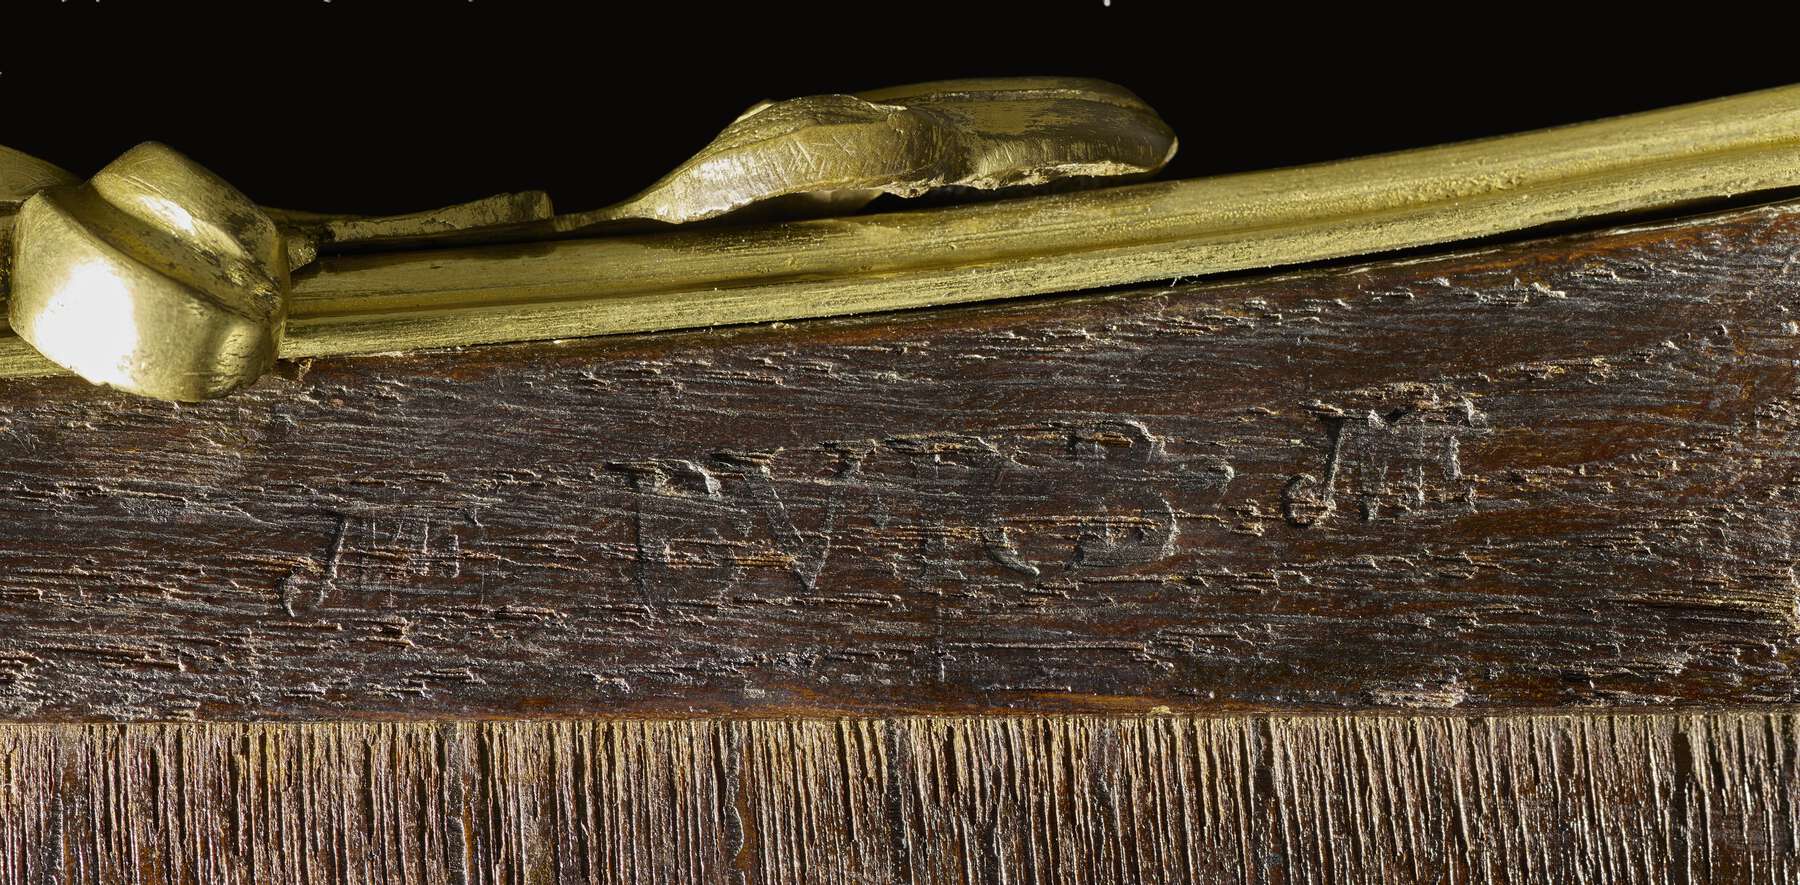 detail of the underside of the table, showing the legible remnants of imprinted stamps